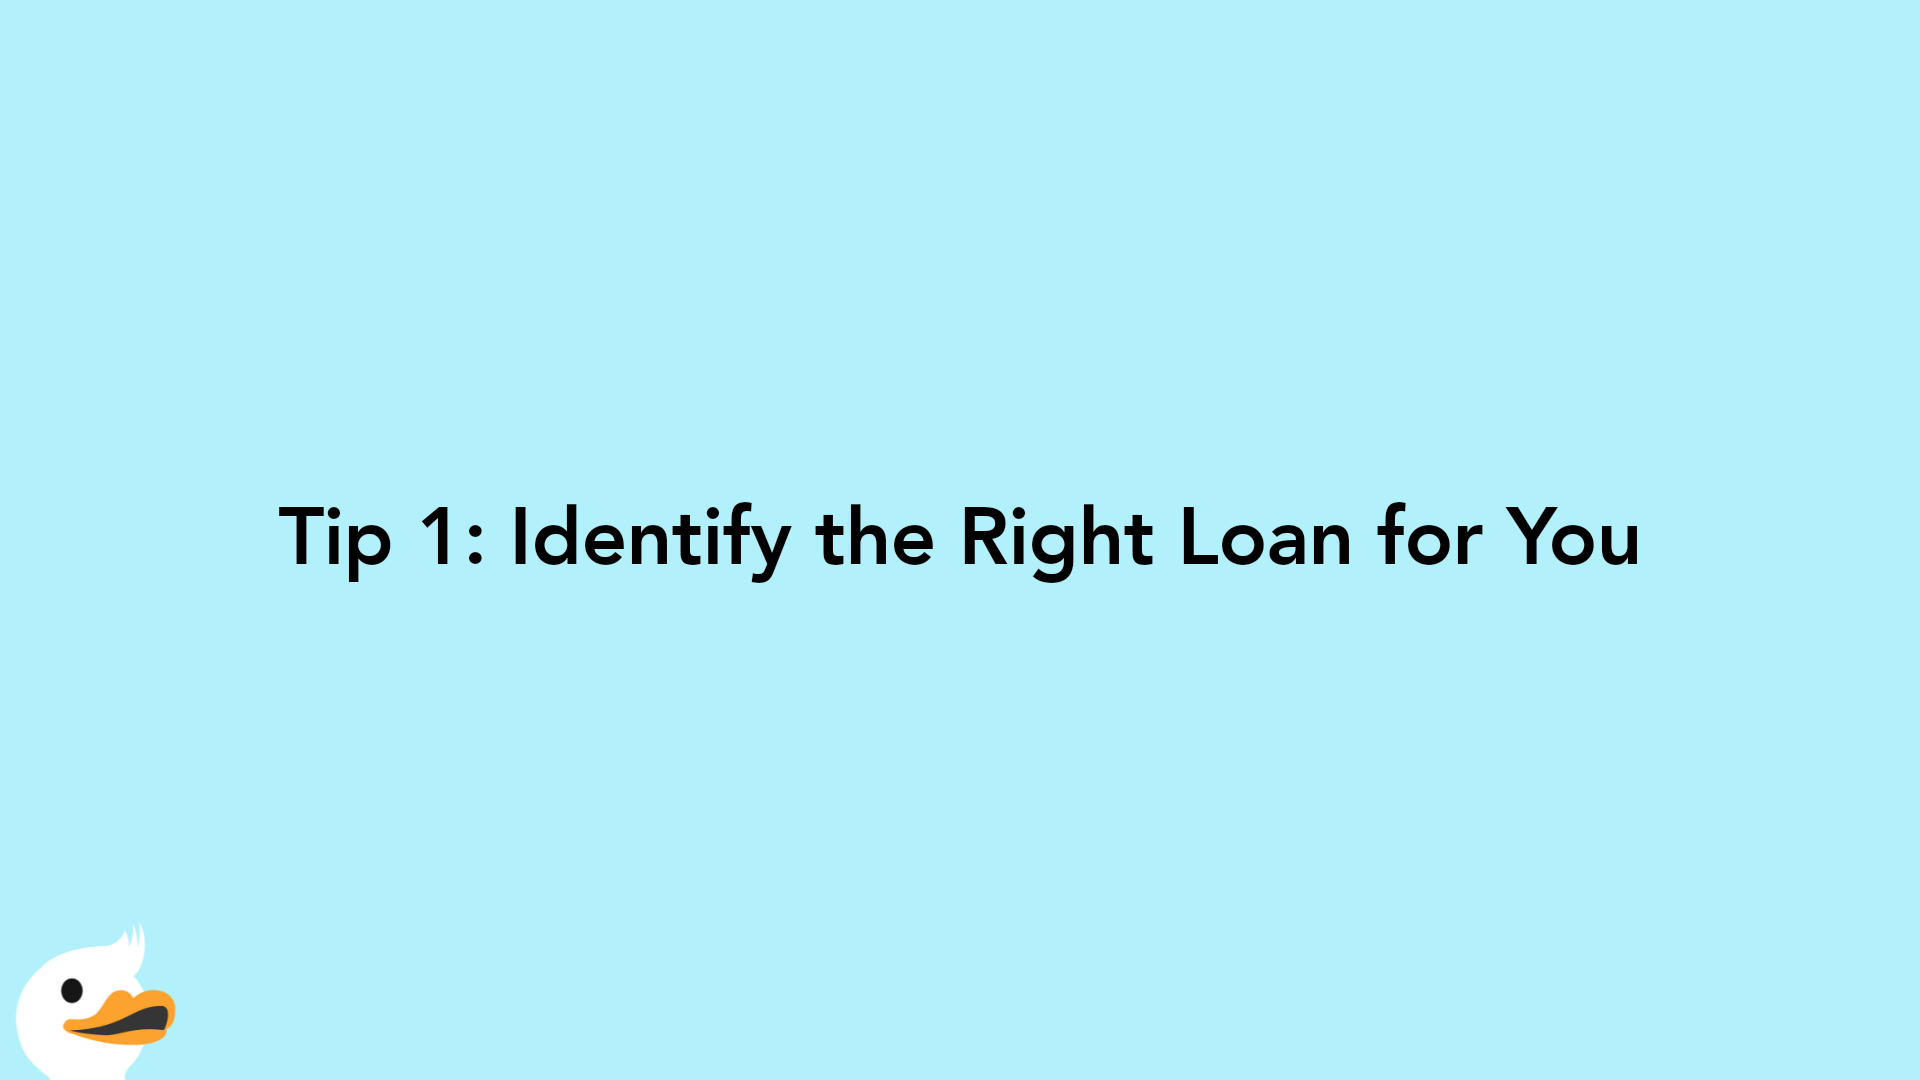 Tip 1: Identify the Right Loan for You